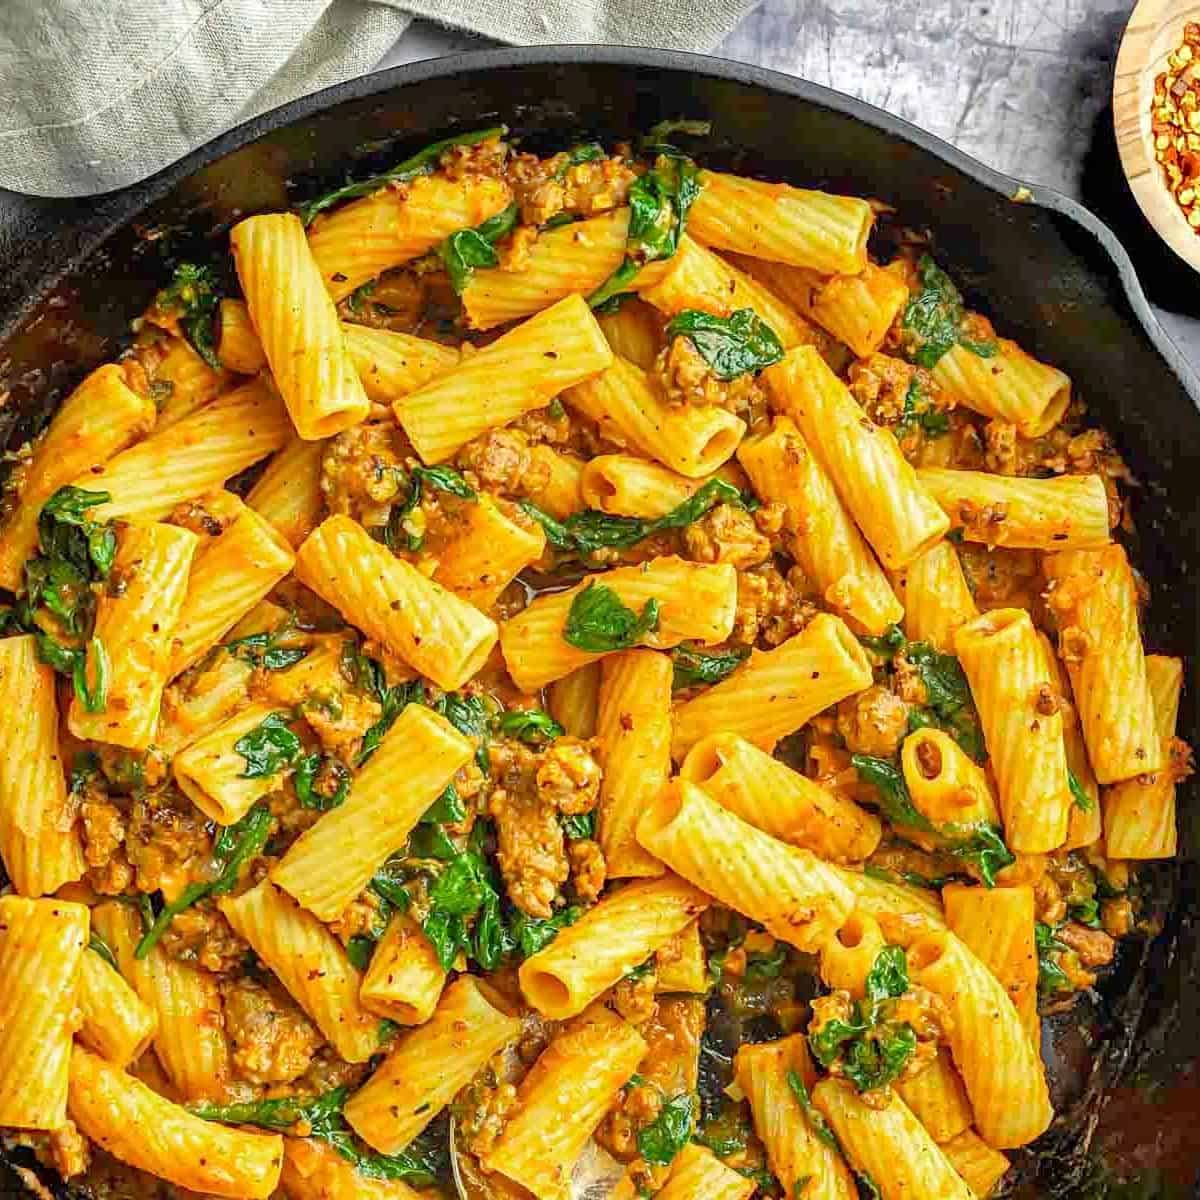 2. Pumpkin Pasta with Italian Sausage - recipes for Italian Sausage with pasta